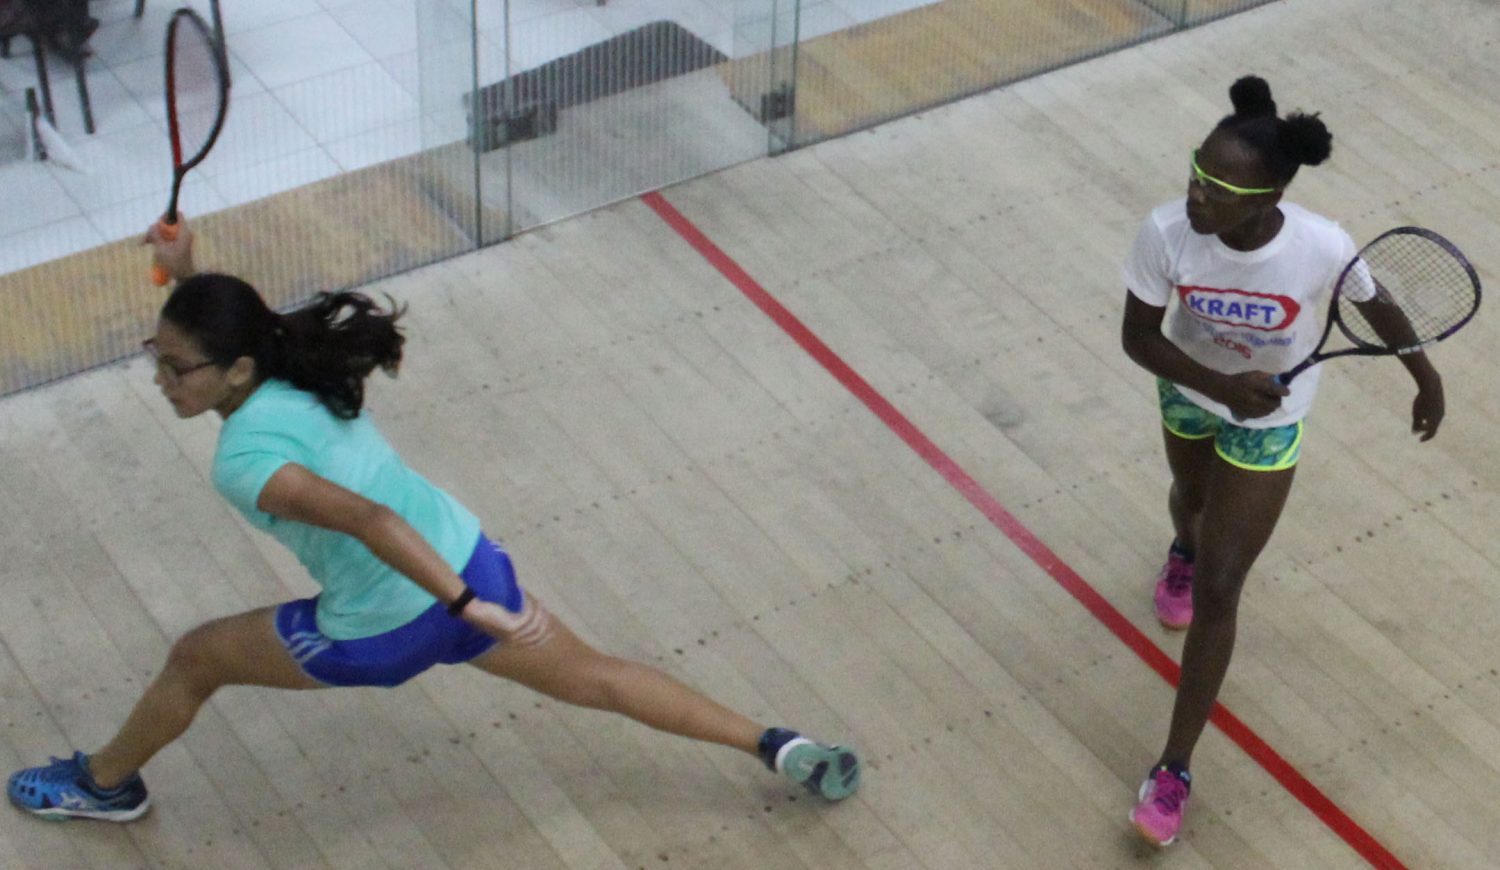 Madison Fernandes (left) is at full stretch as she strives to retrieve a well-placed ball from Abosaide Cadogan during their match in the Woodpecker Products Junior Nationals Squash Tournament last evening at the Georgetown Club. Cadogan won in straight sets 12-10, 11-7, 12-10. (Royston Alkins photo)
